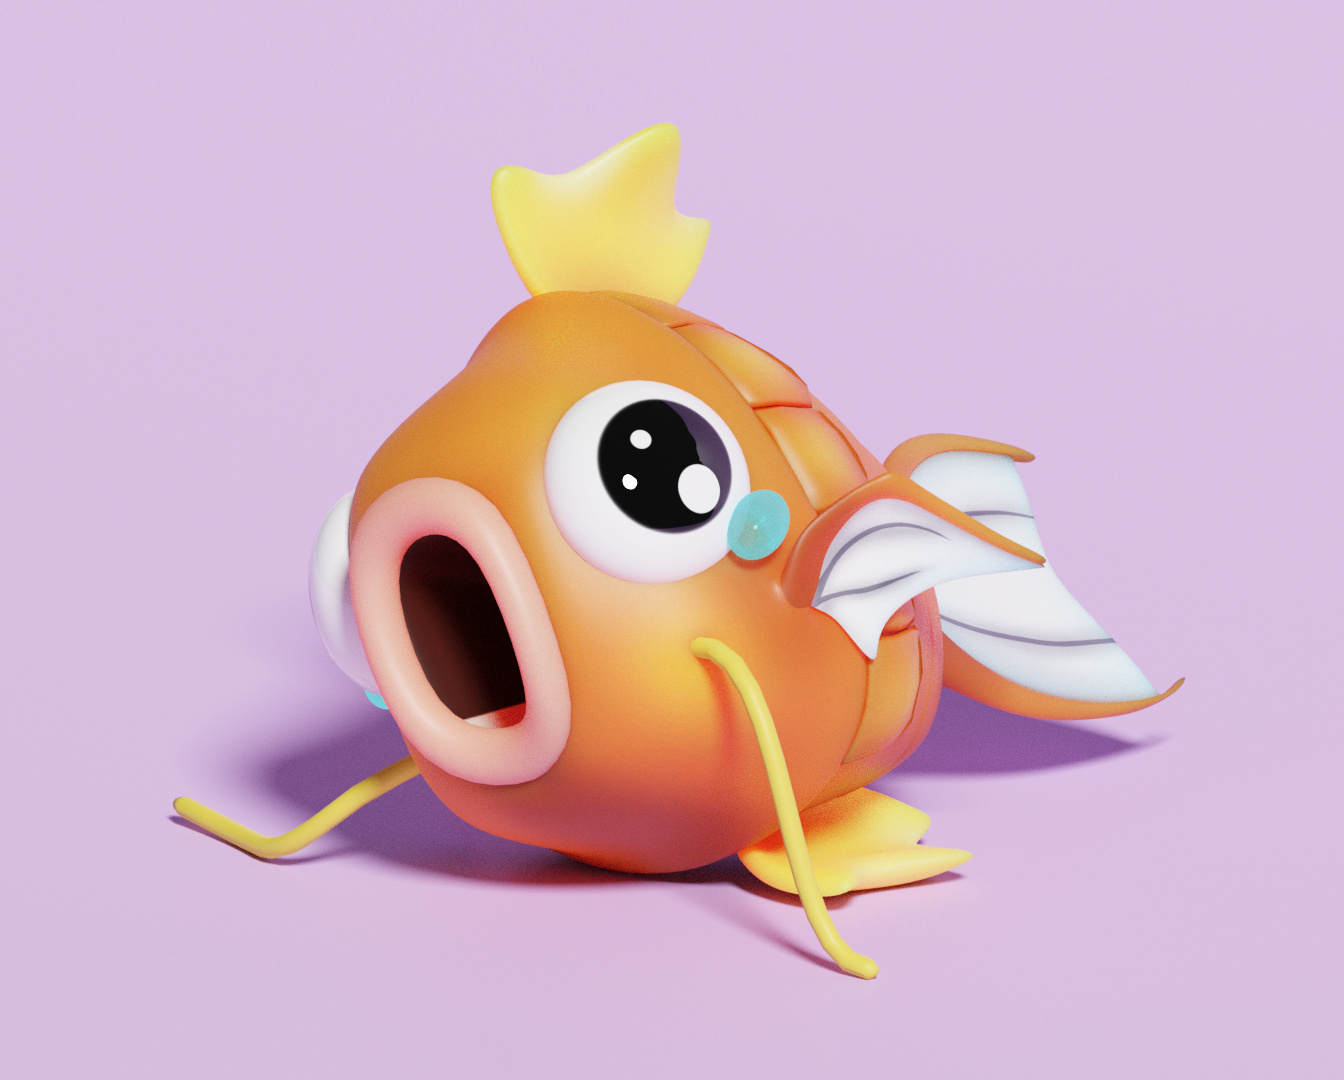 Here's a catchy song that affectionately celebrates Magikarp, the useless  Pokémon